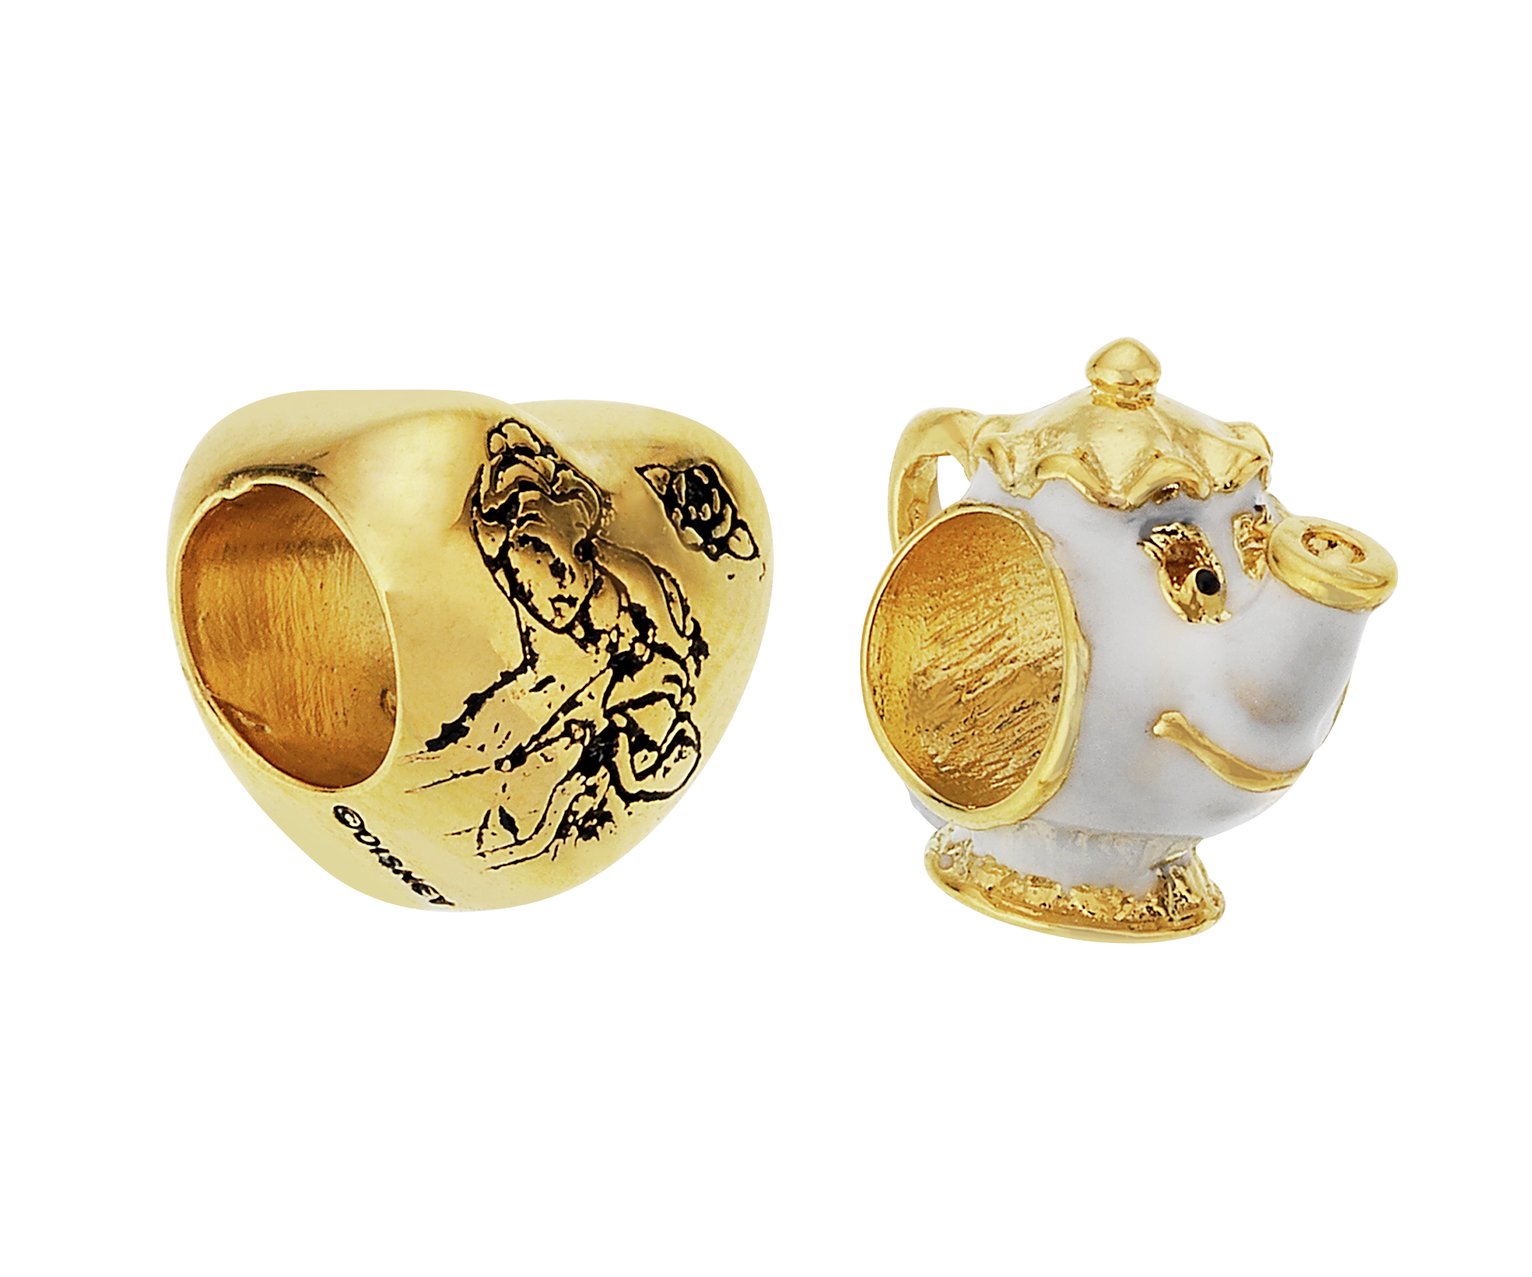 Disney Belle and Mrs Potts Gold Colour Charms - Set of 2